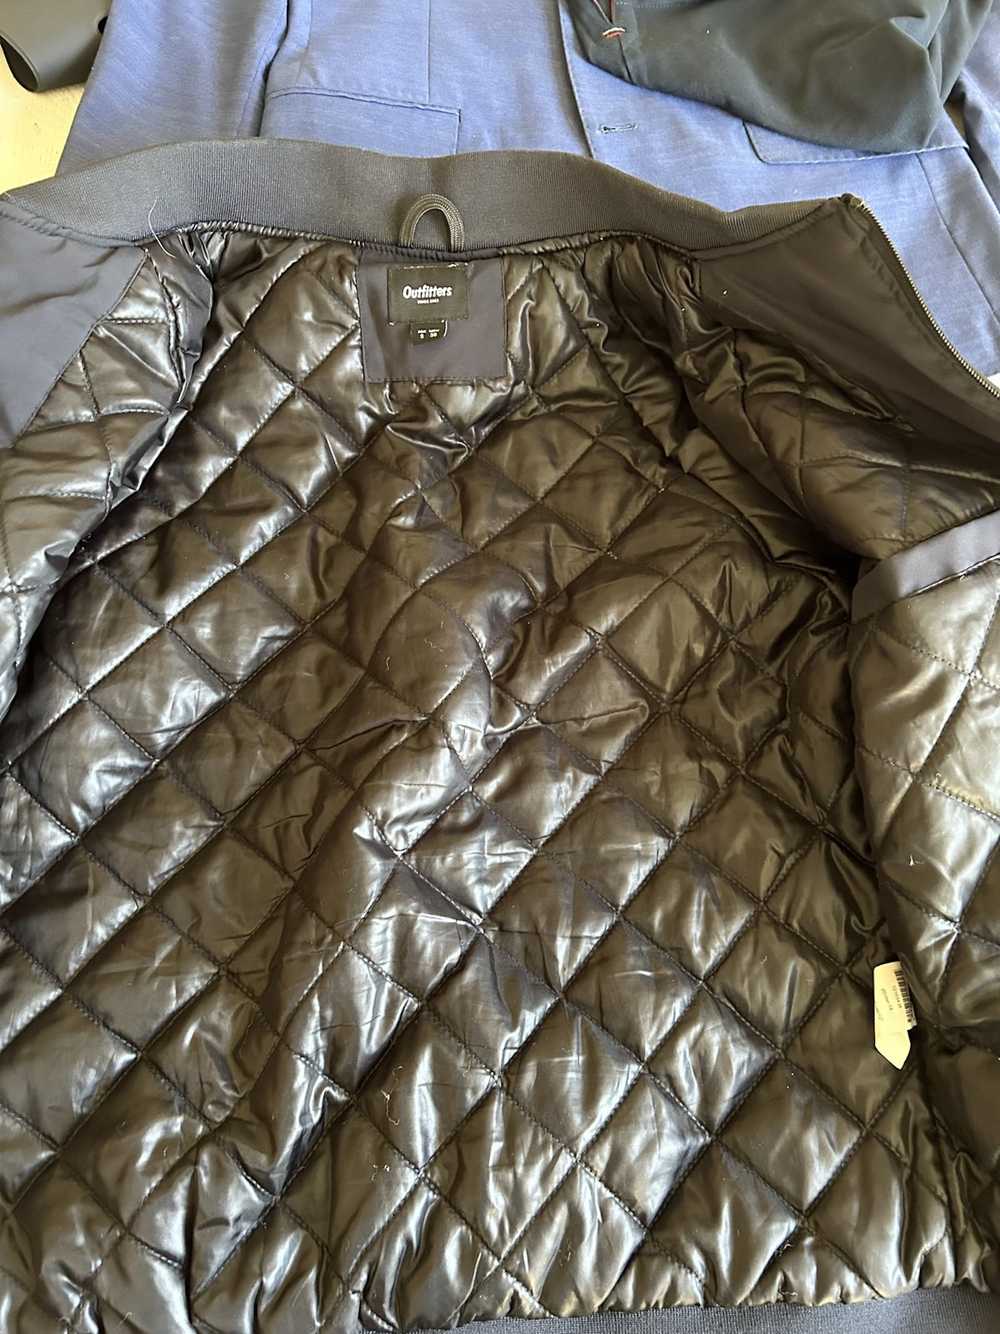 Designer Outfitter’s puffy jacket - image 6